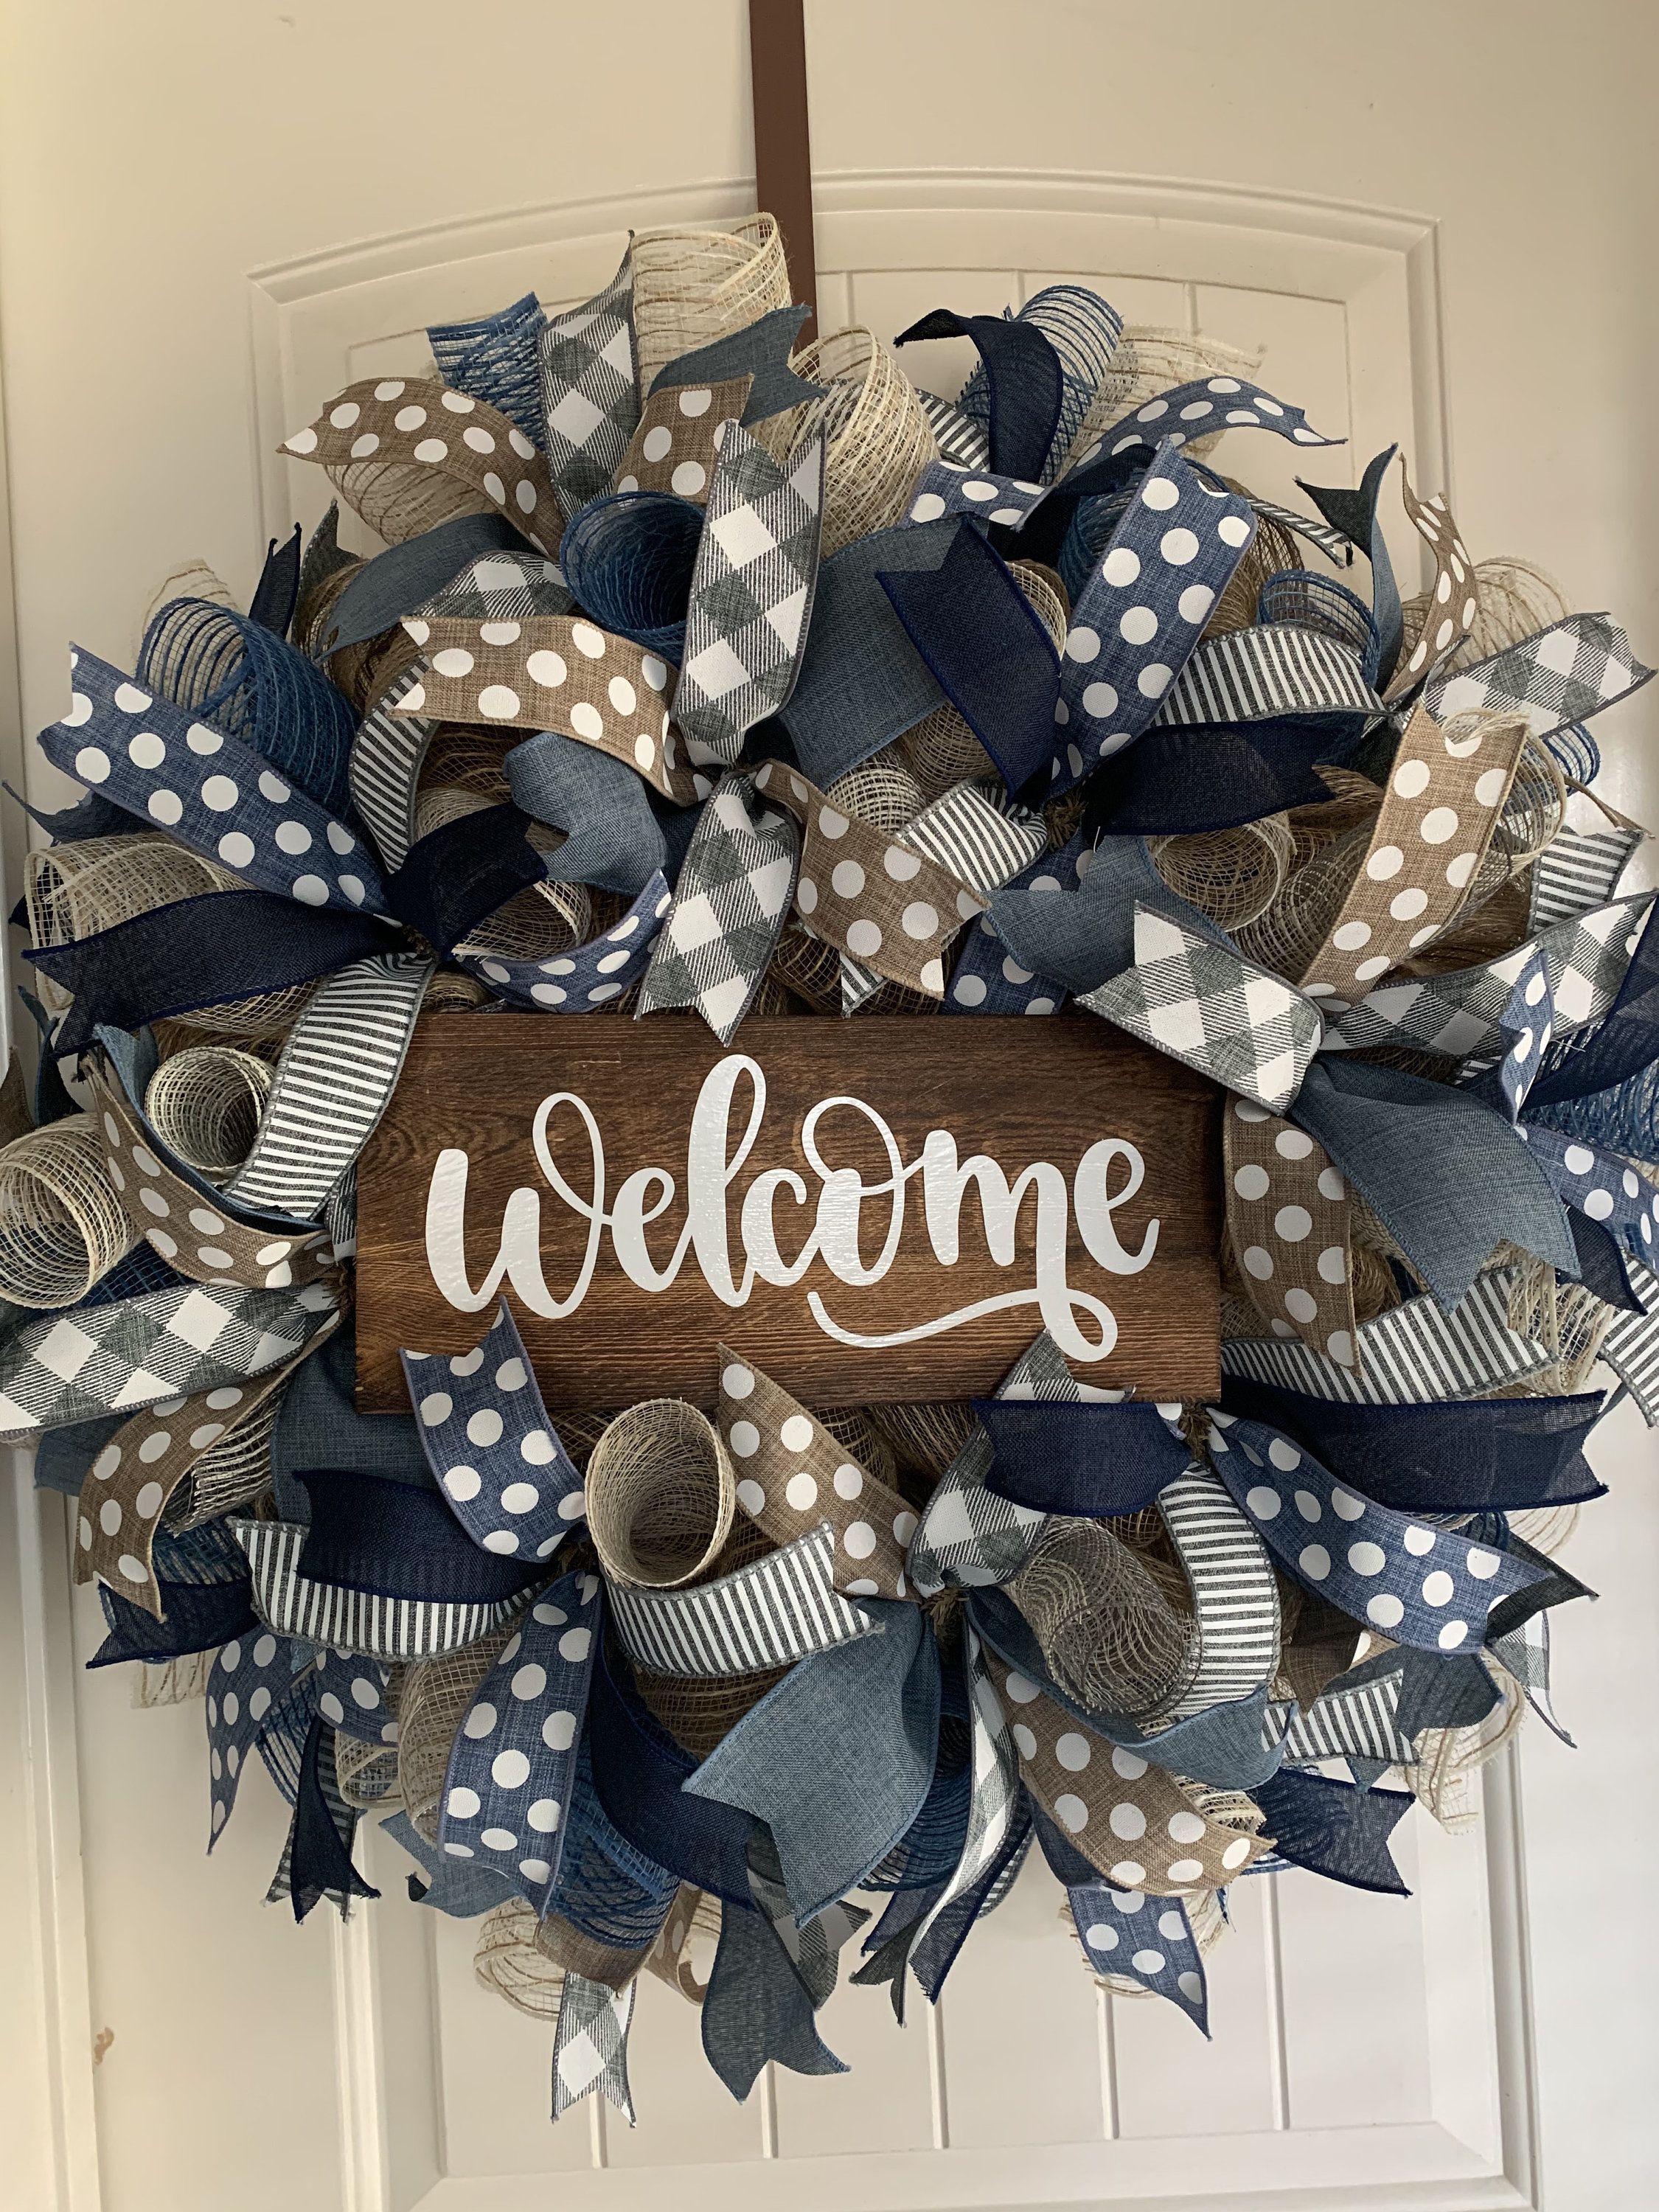 Everyday Burlap Mesh Blue and White Door Wreath with Polka | Etsy -   21 holiday Wreaths mesh ideas